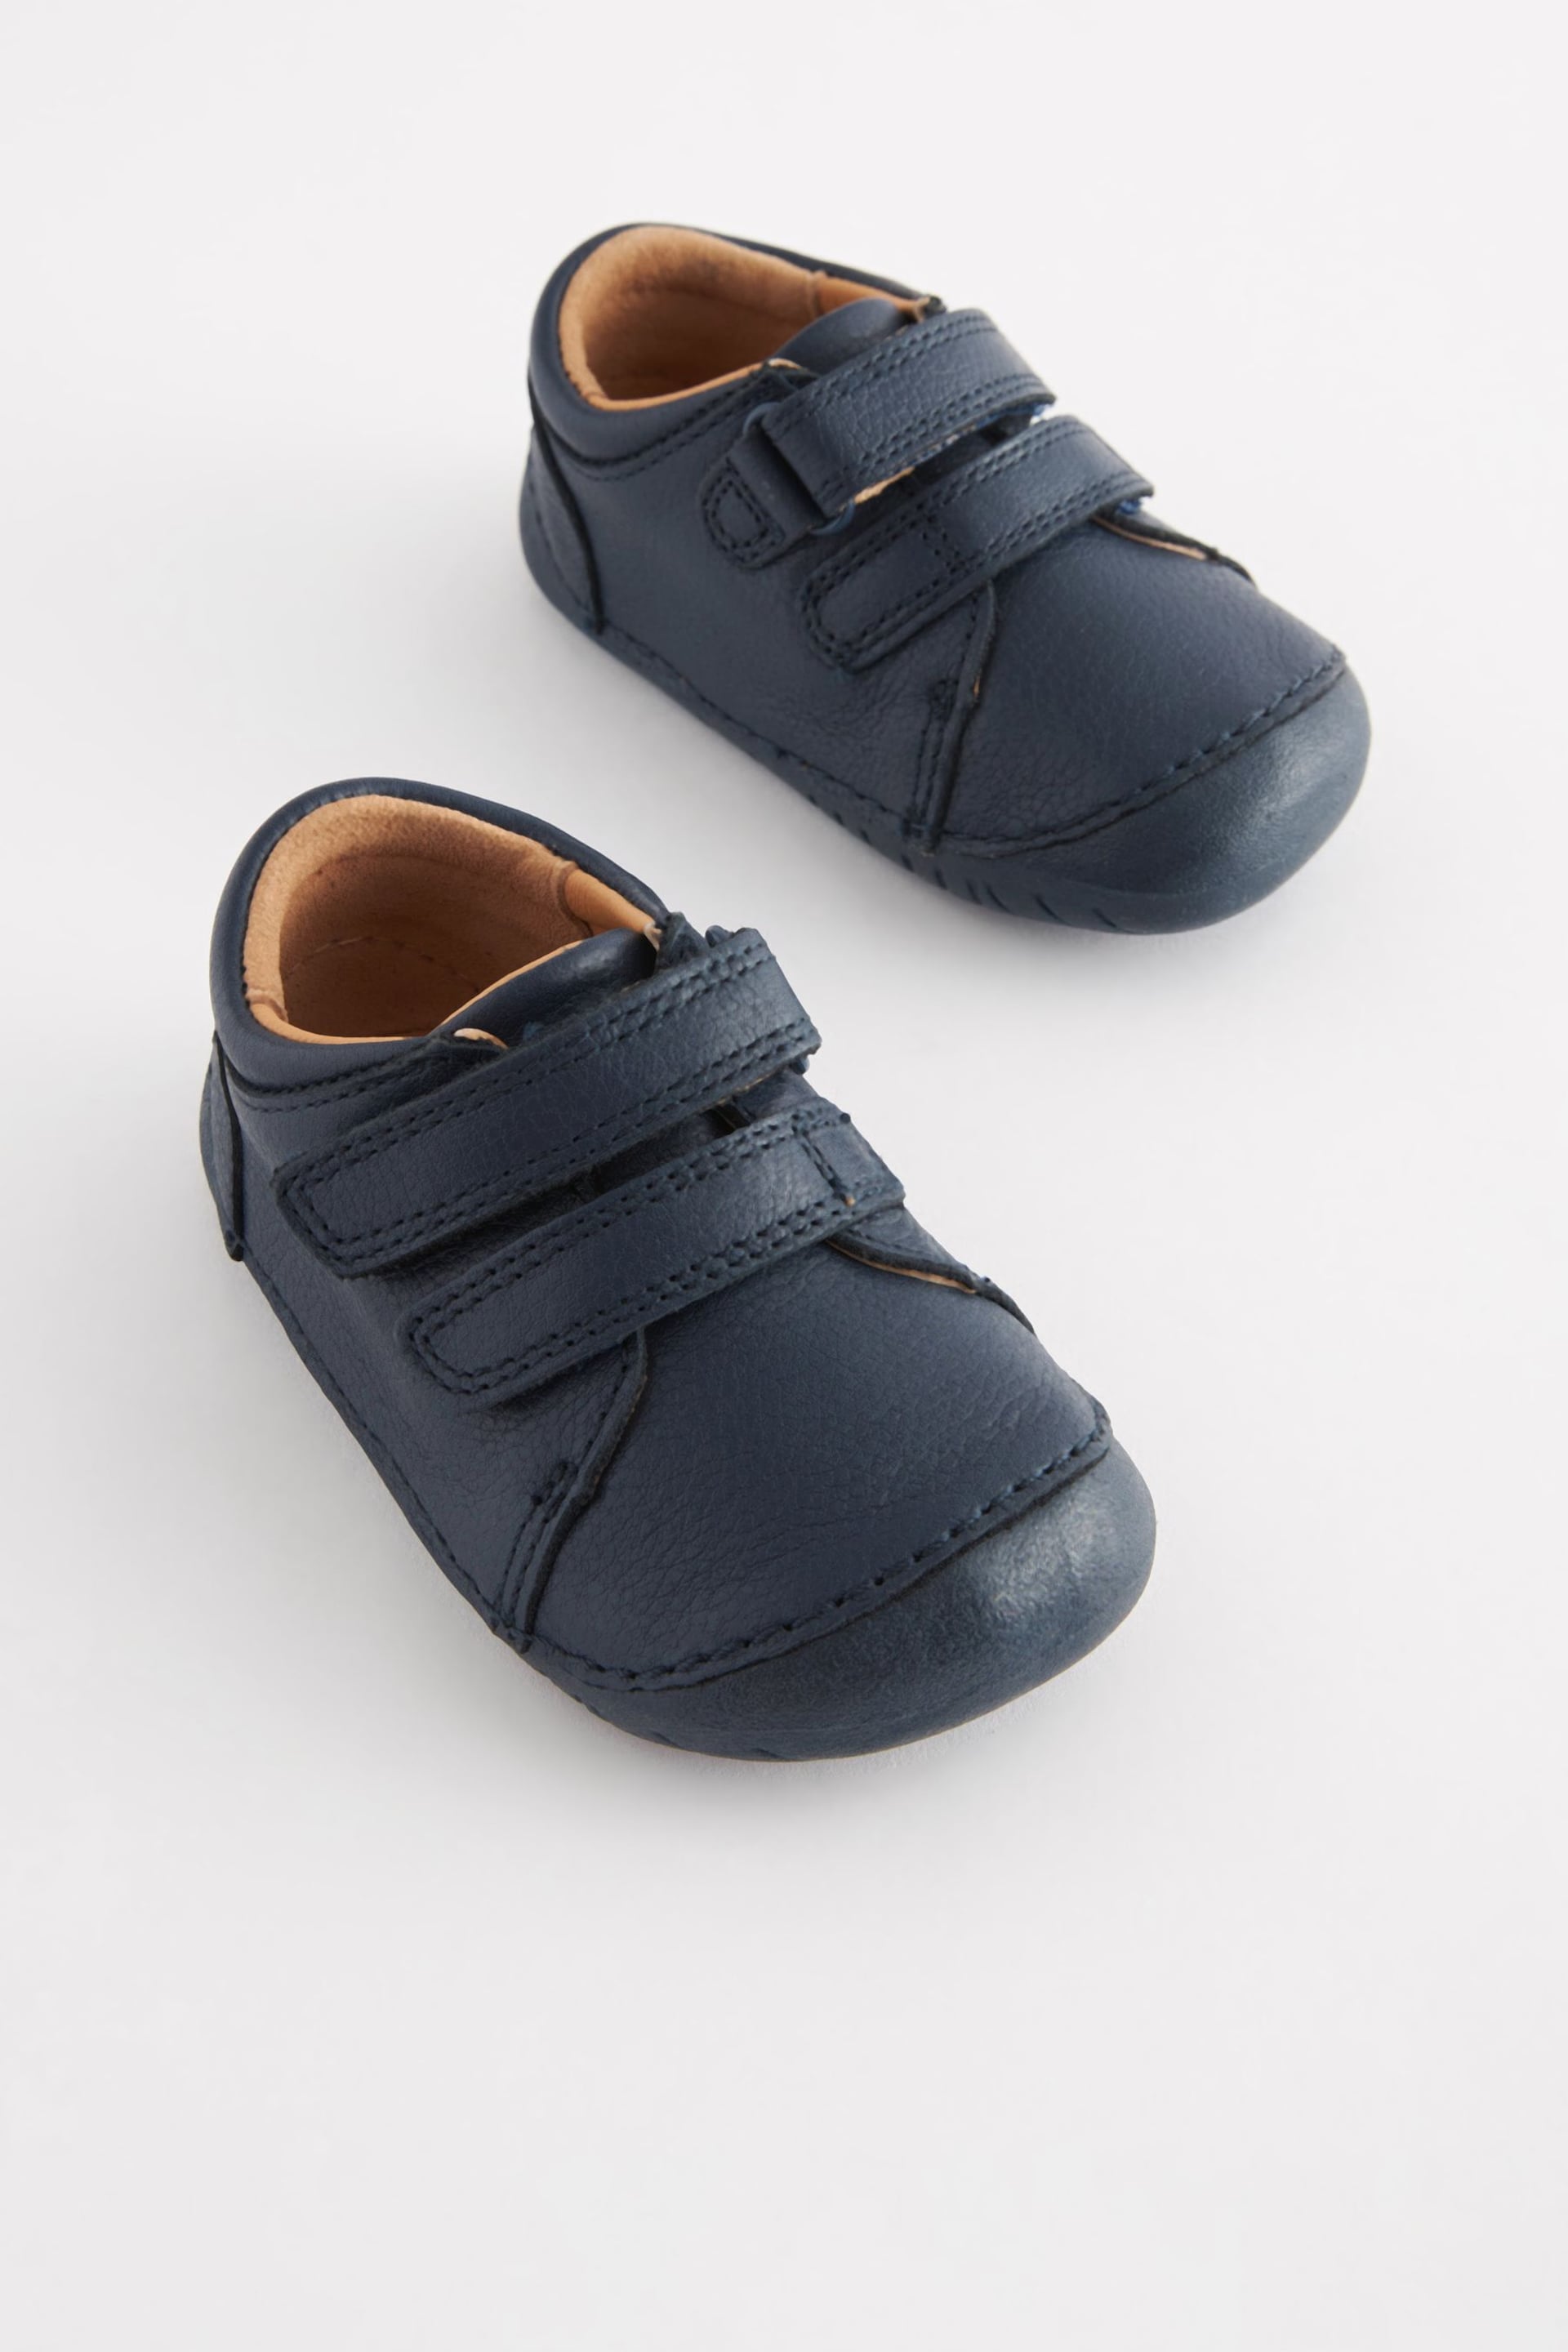 Navy Blue Wide Fit (G) Crawler Shoes - Image 1 of 5